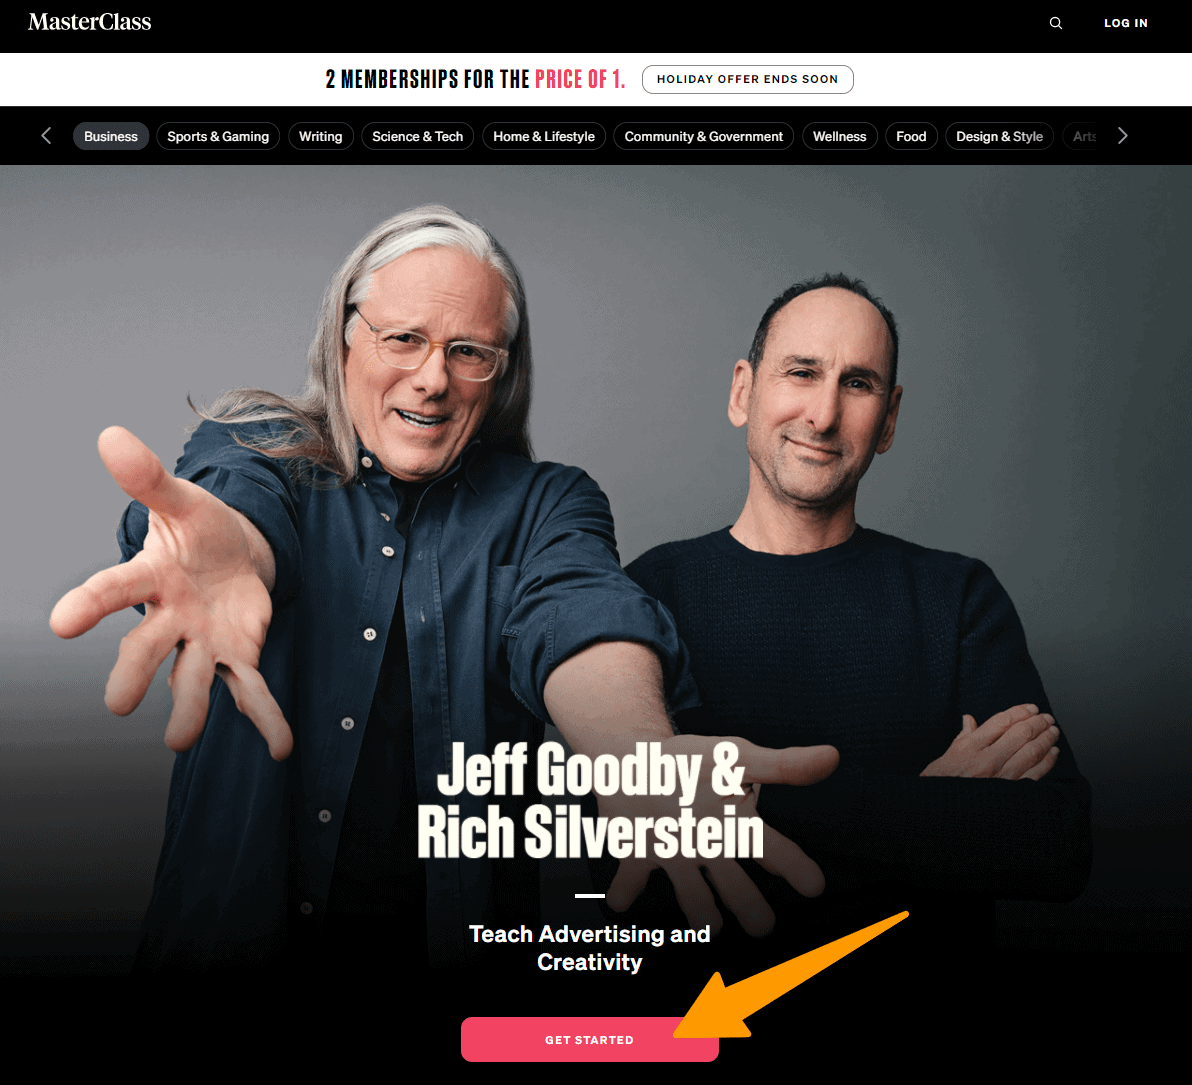 Jeff Goodby and Rich Silverstein Masterclass Review